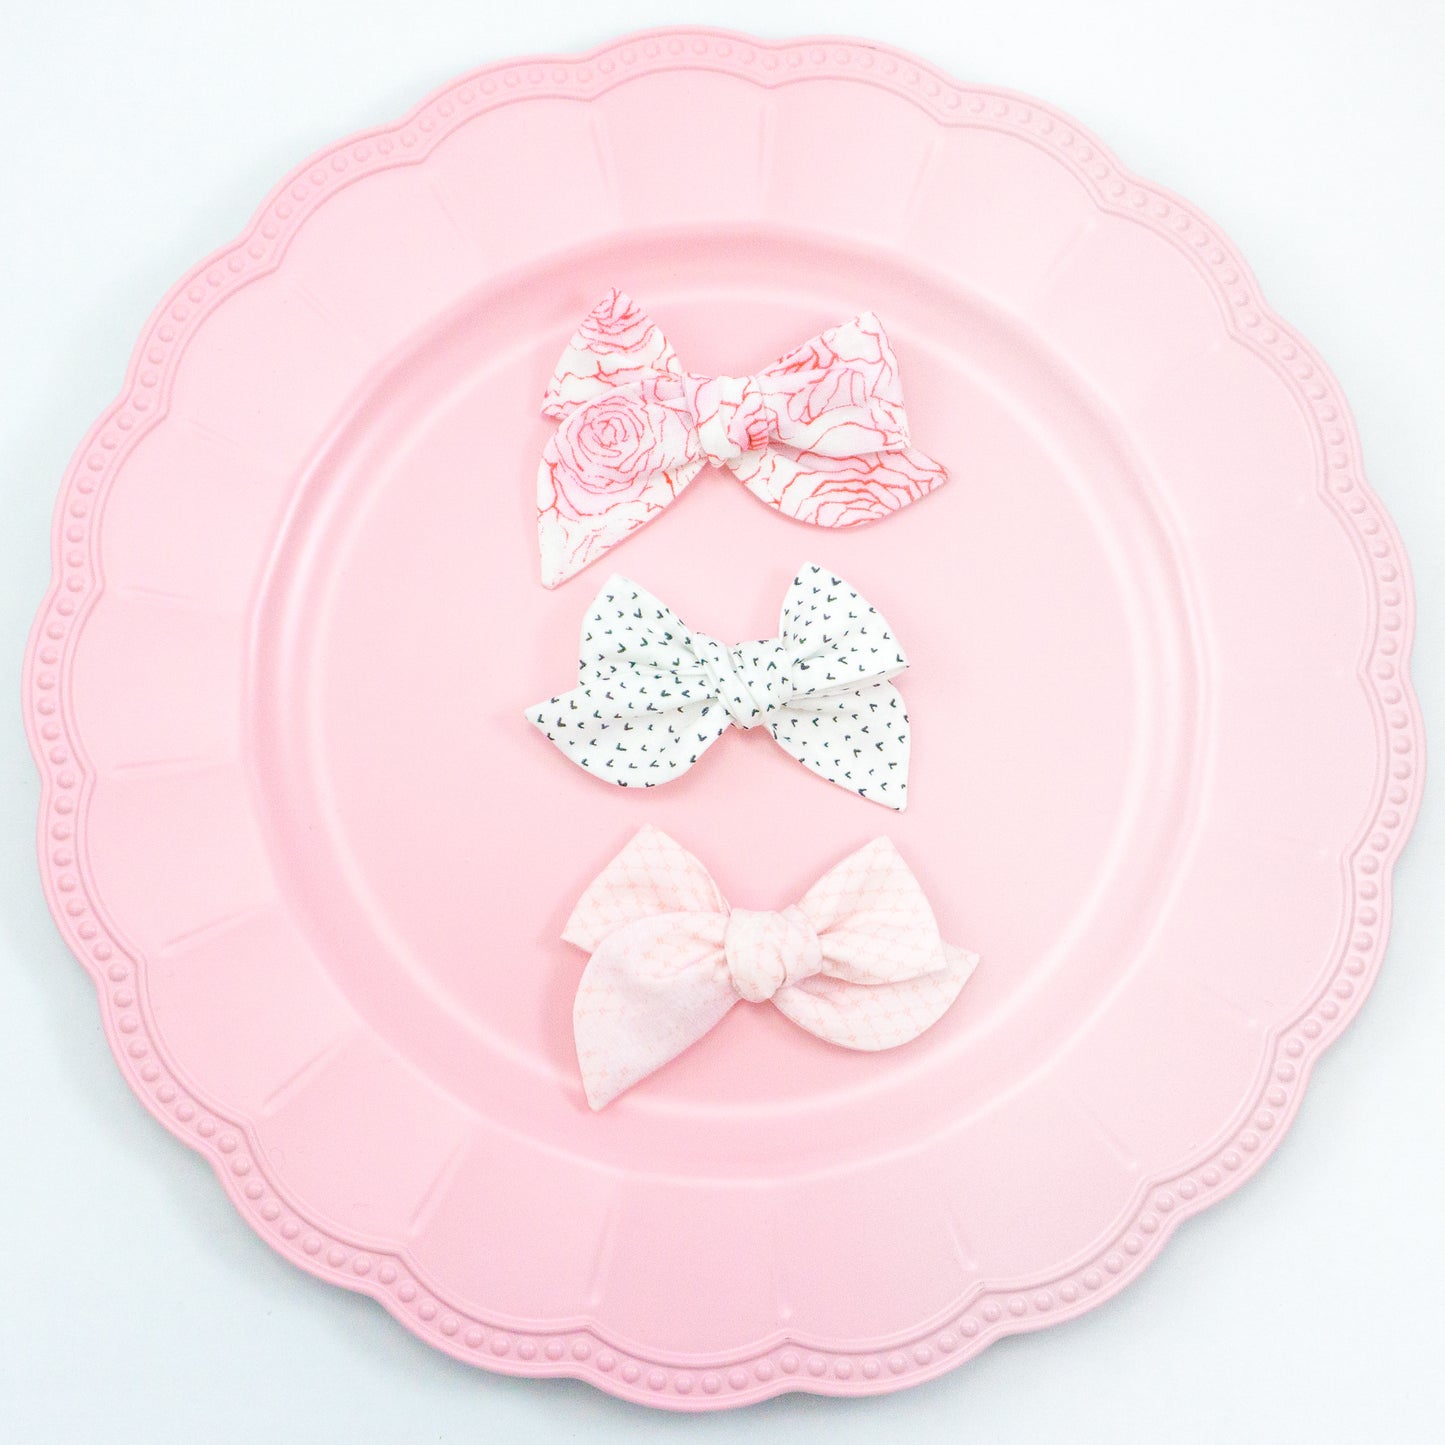 Handtied Fabric Bow - Pink French Lace